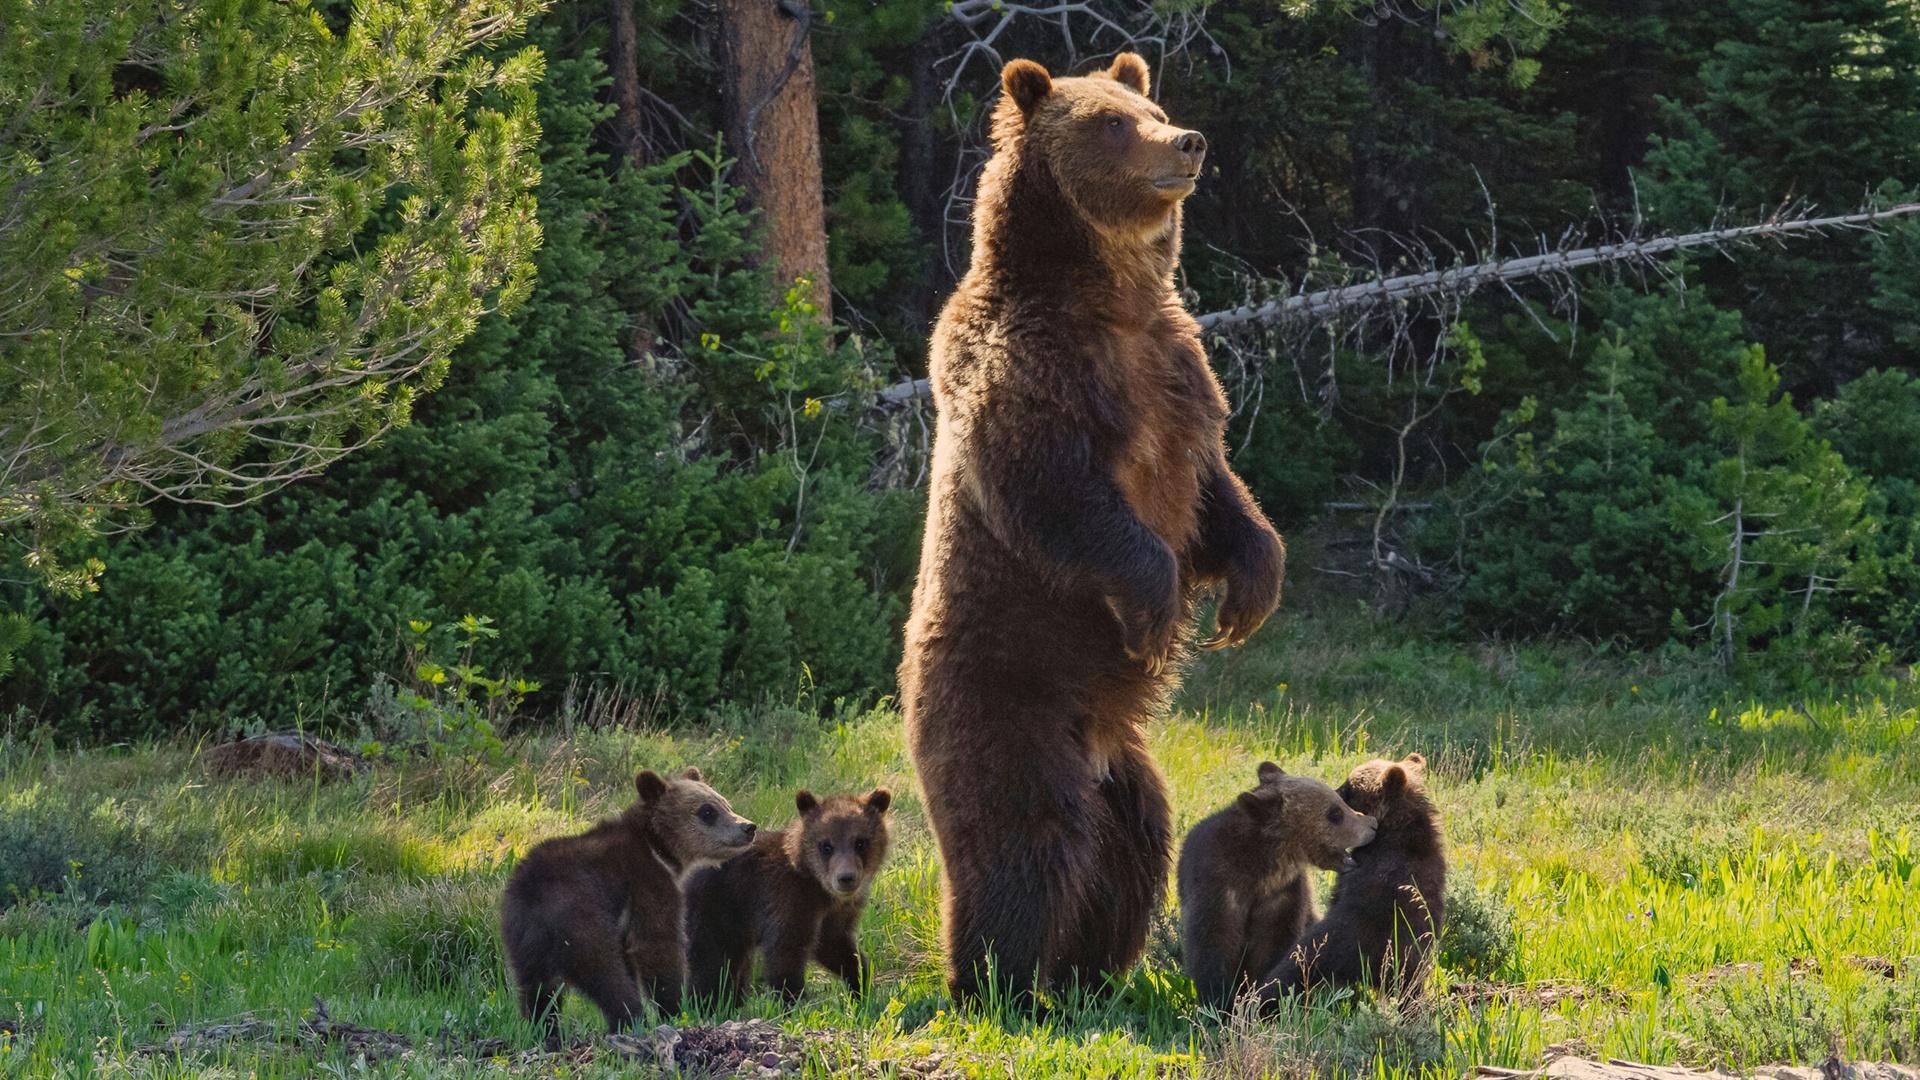 Grizzly 399 and her 4 bear cubs.